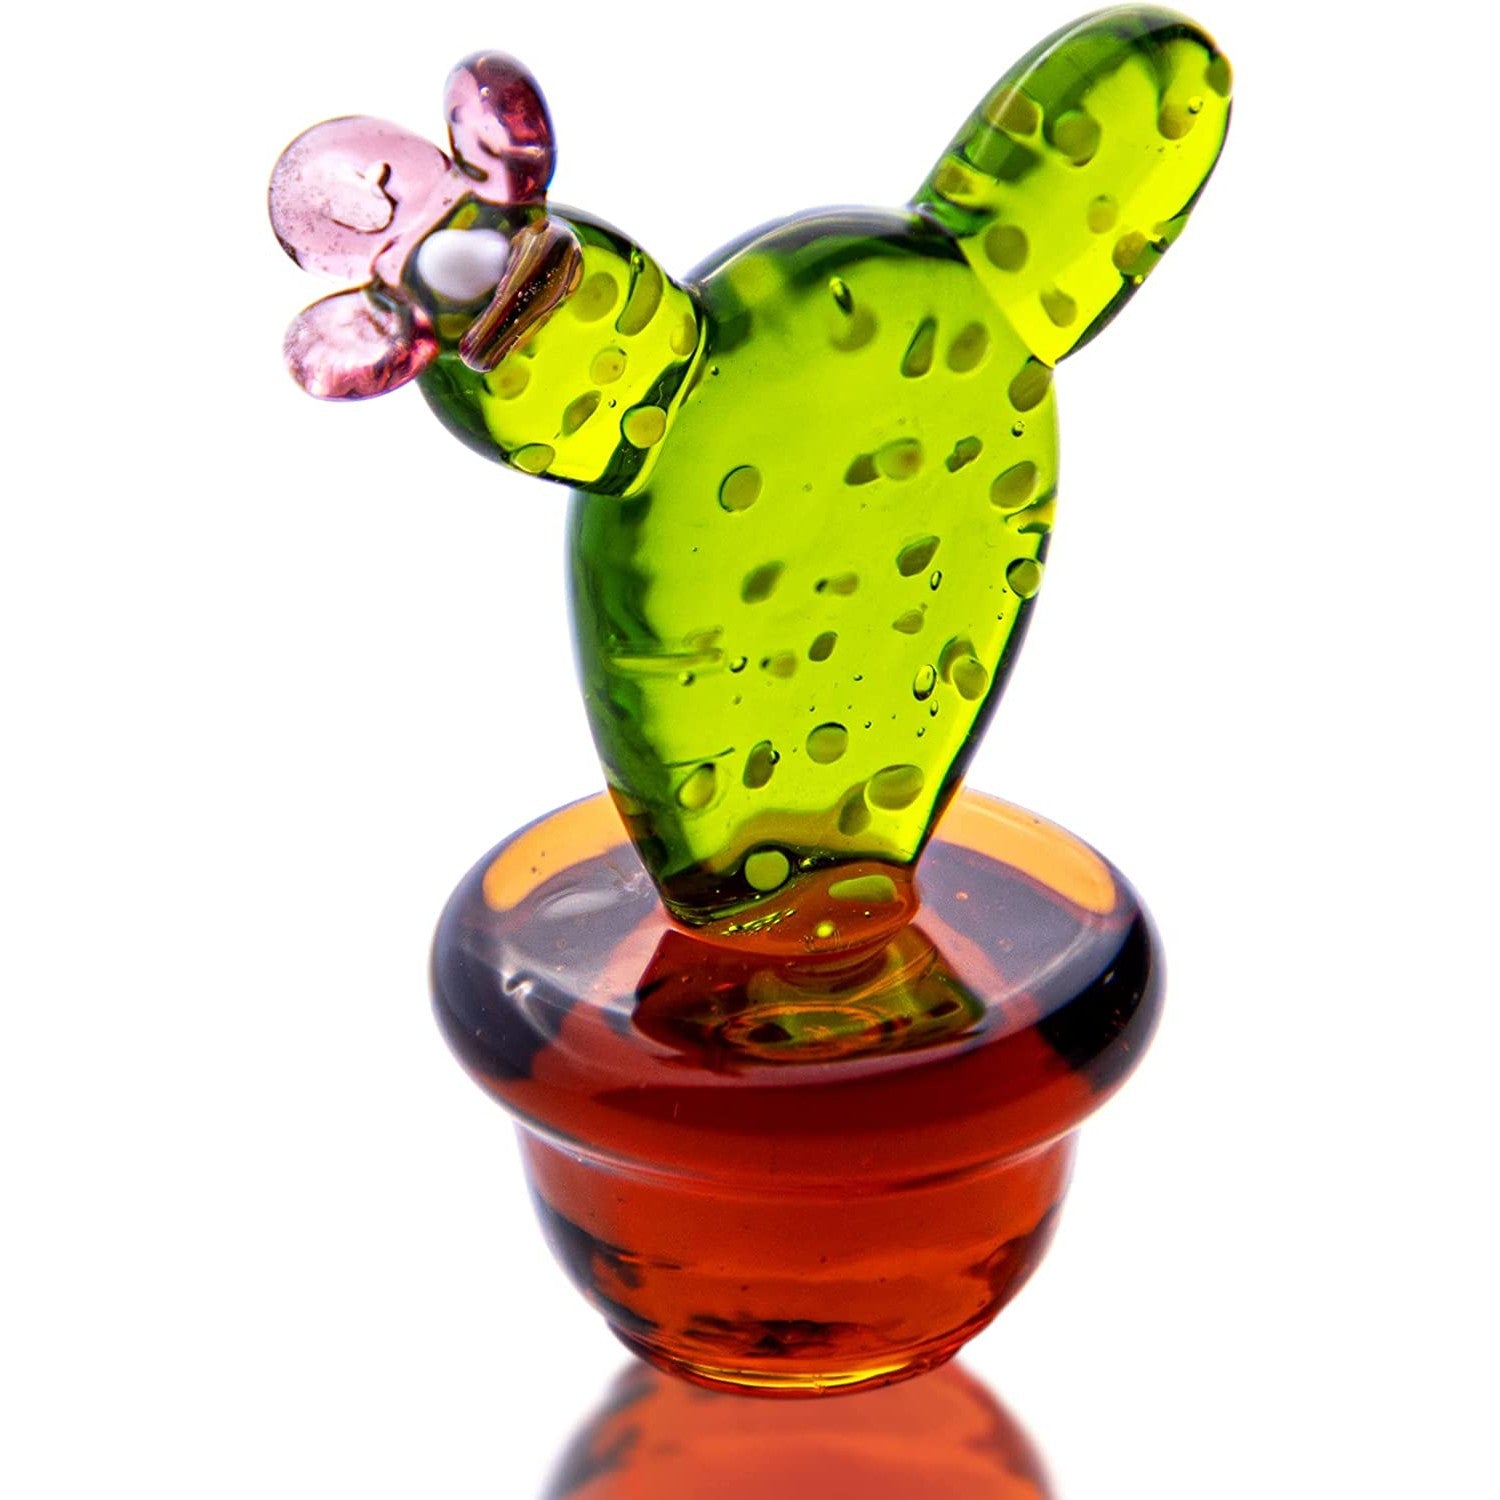 A cute glass cactus figurine colored green with a brown pot.